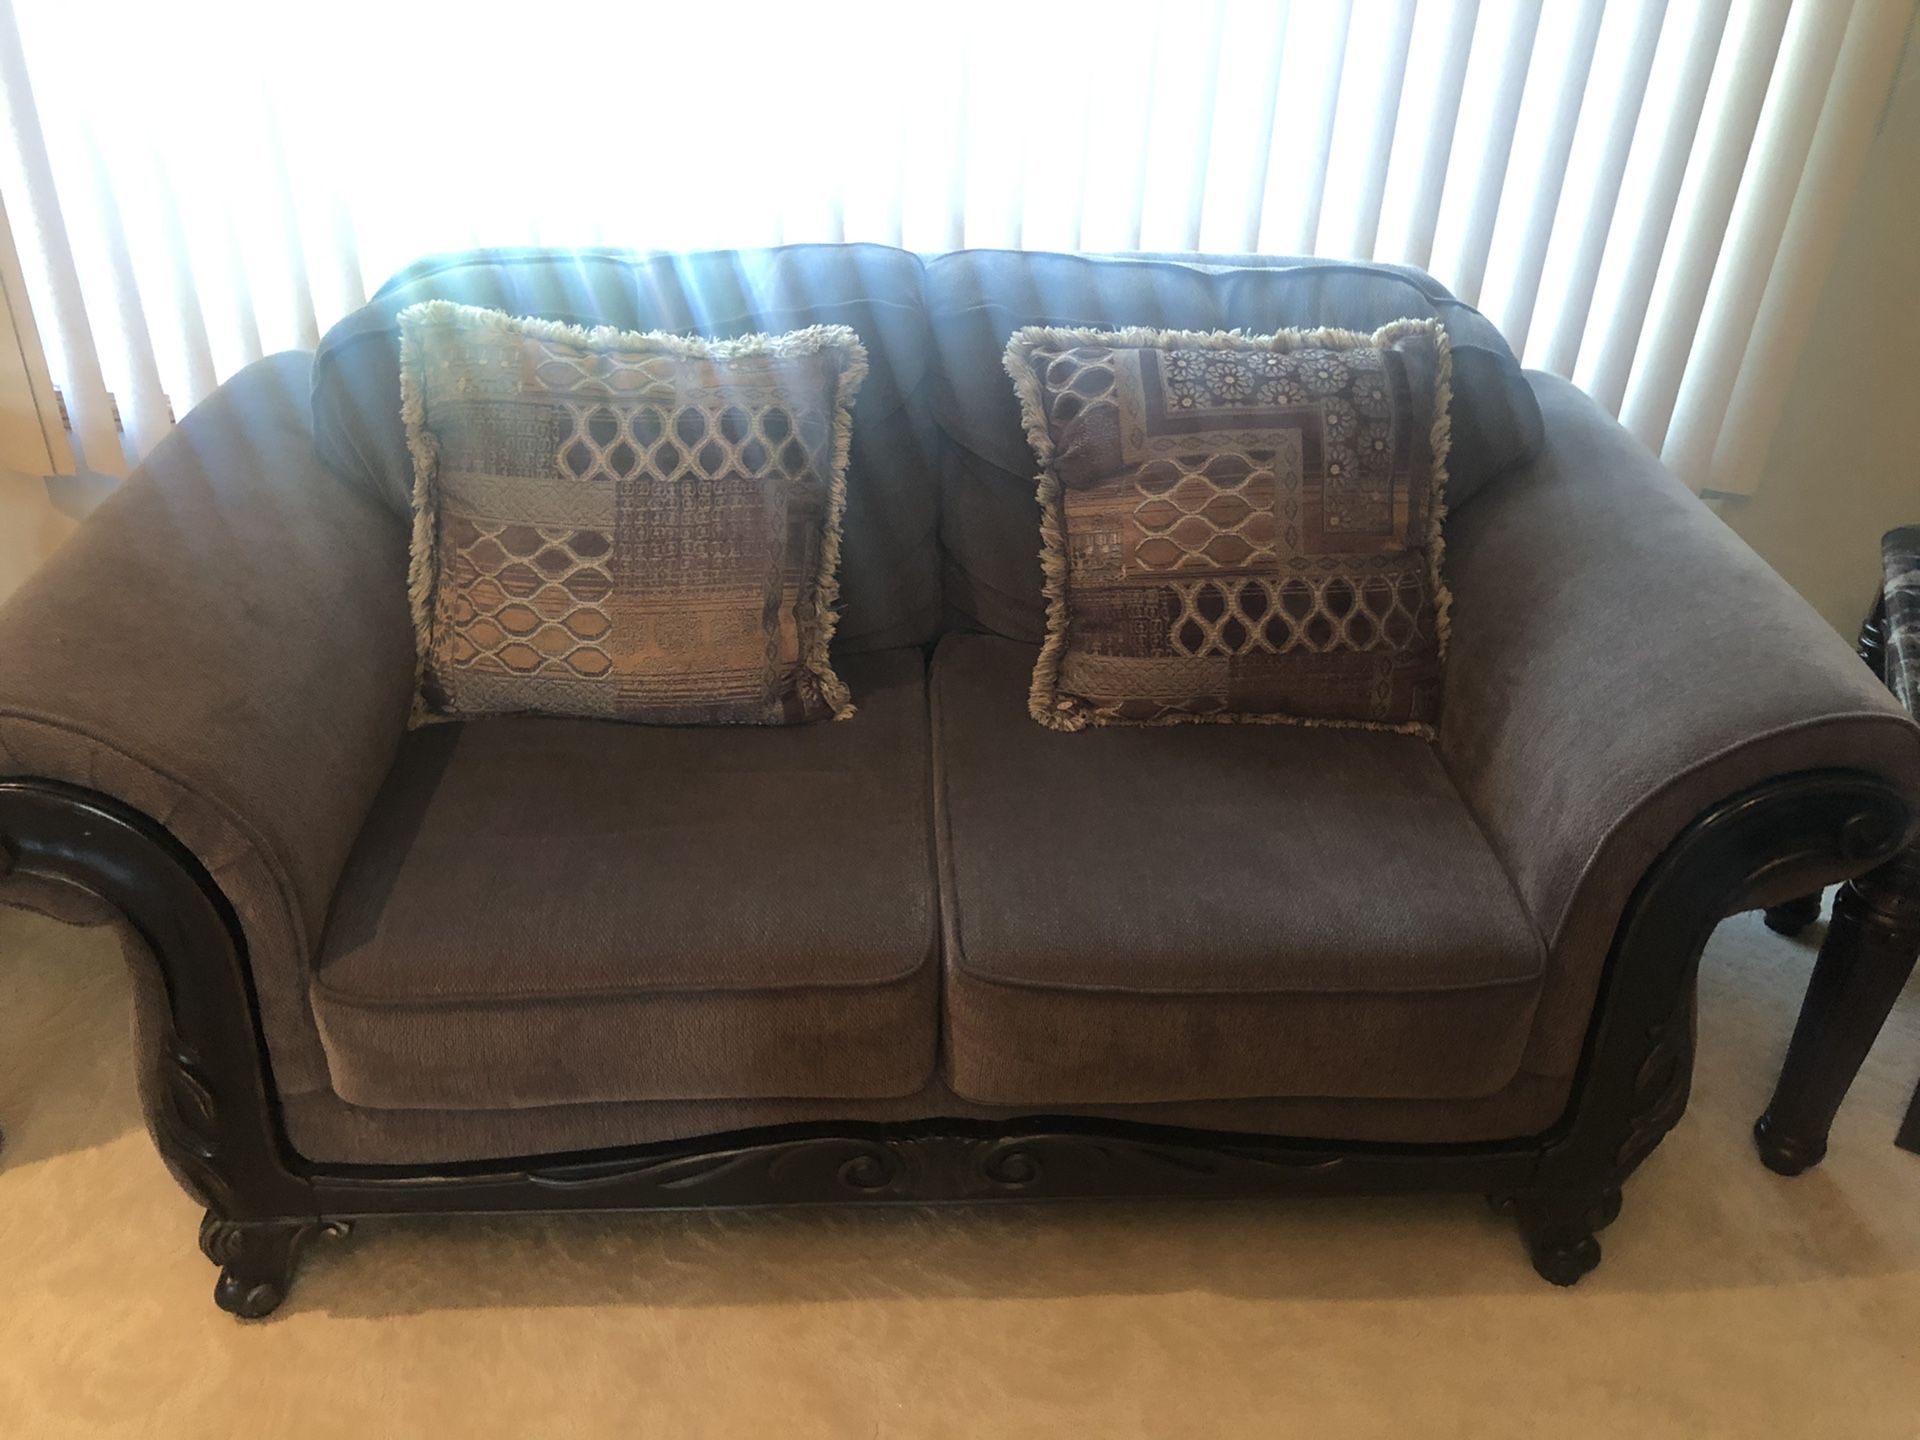 Set of four couches. (Has matching coffee tables)